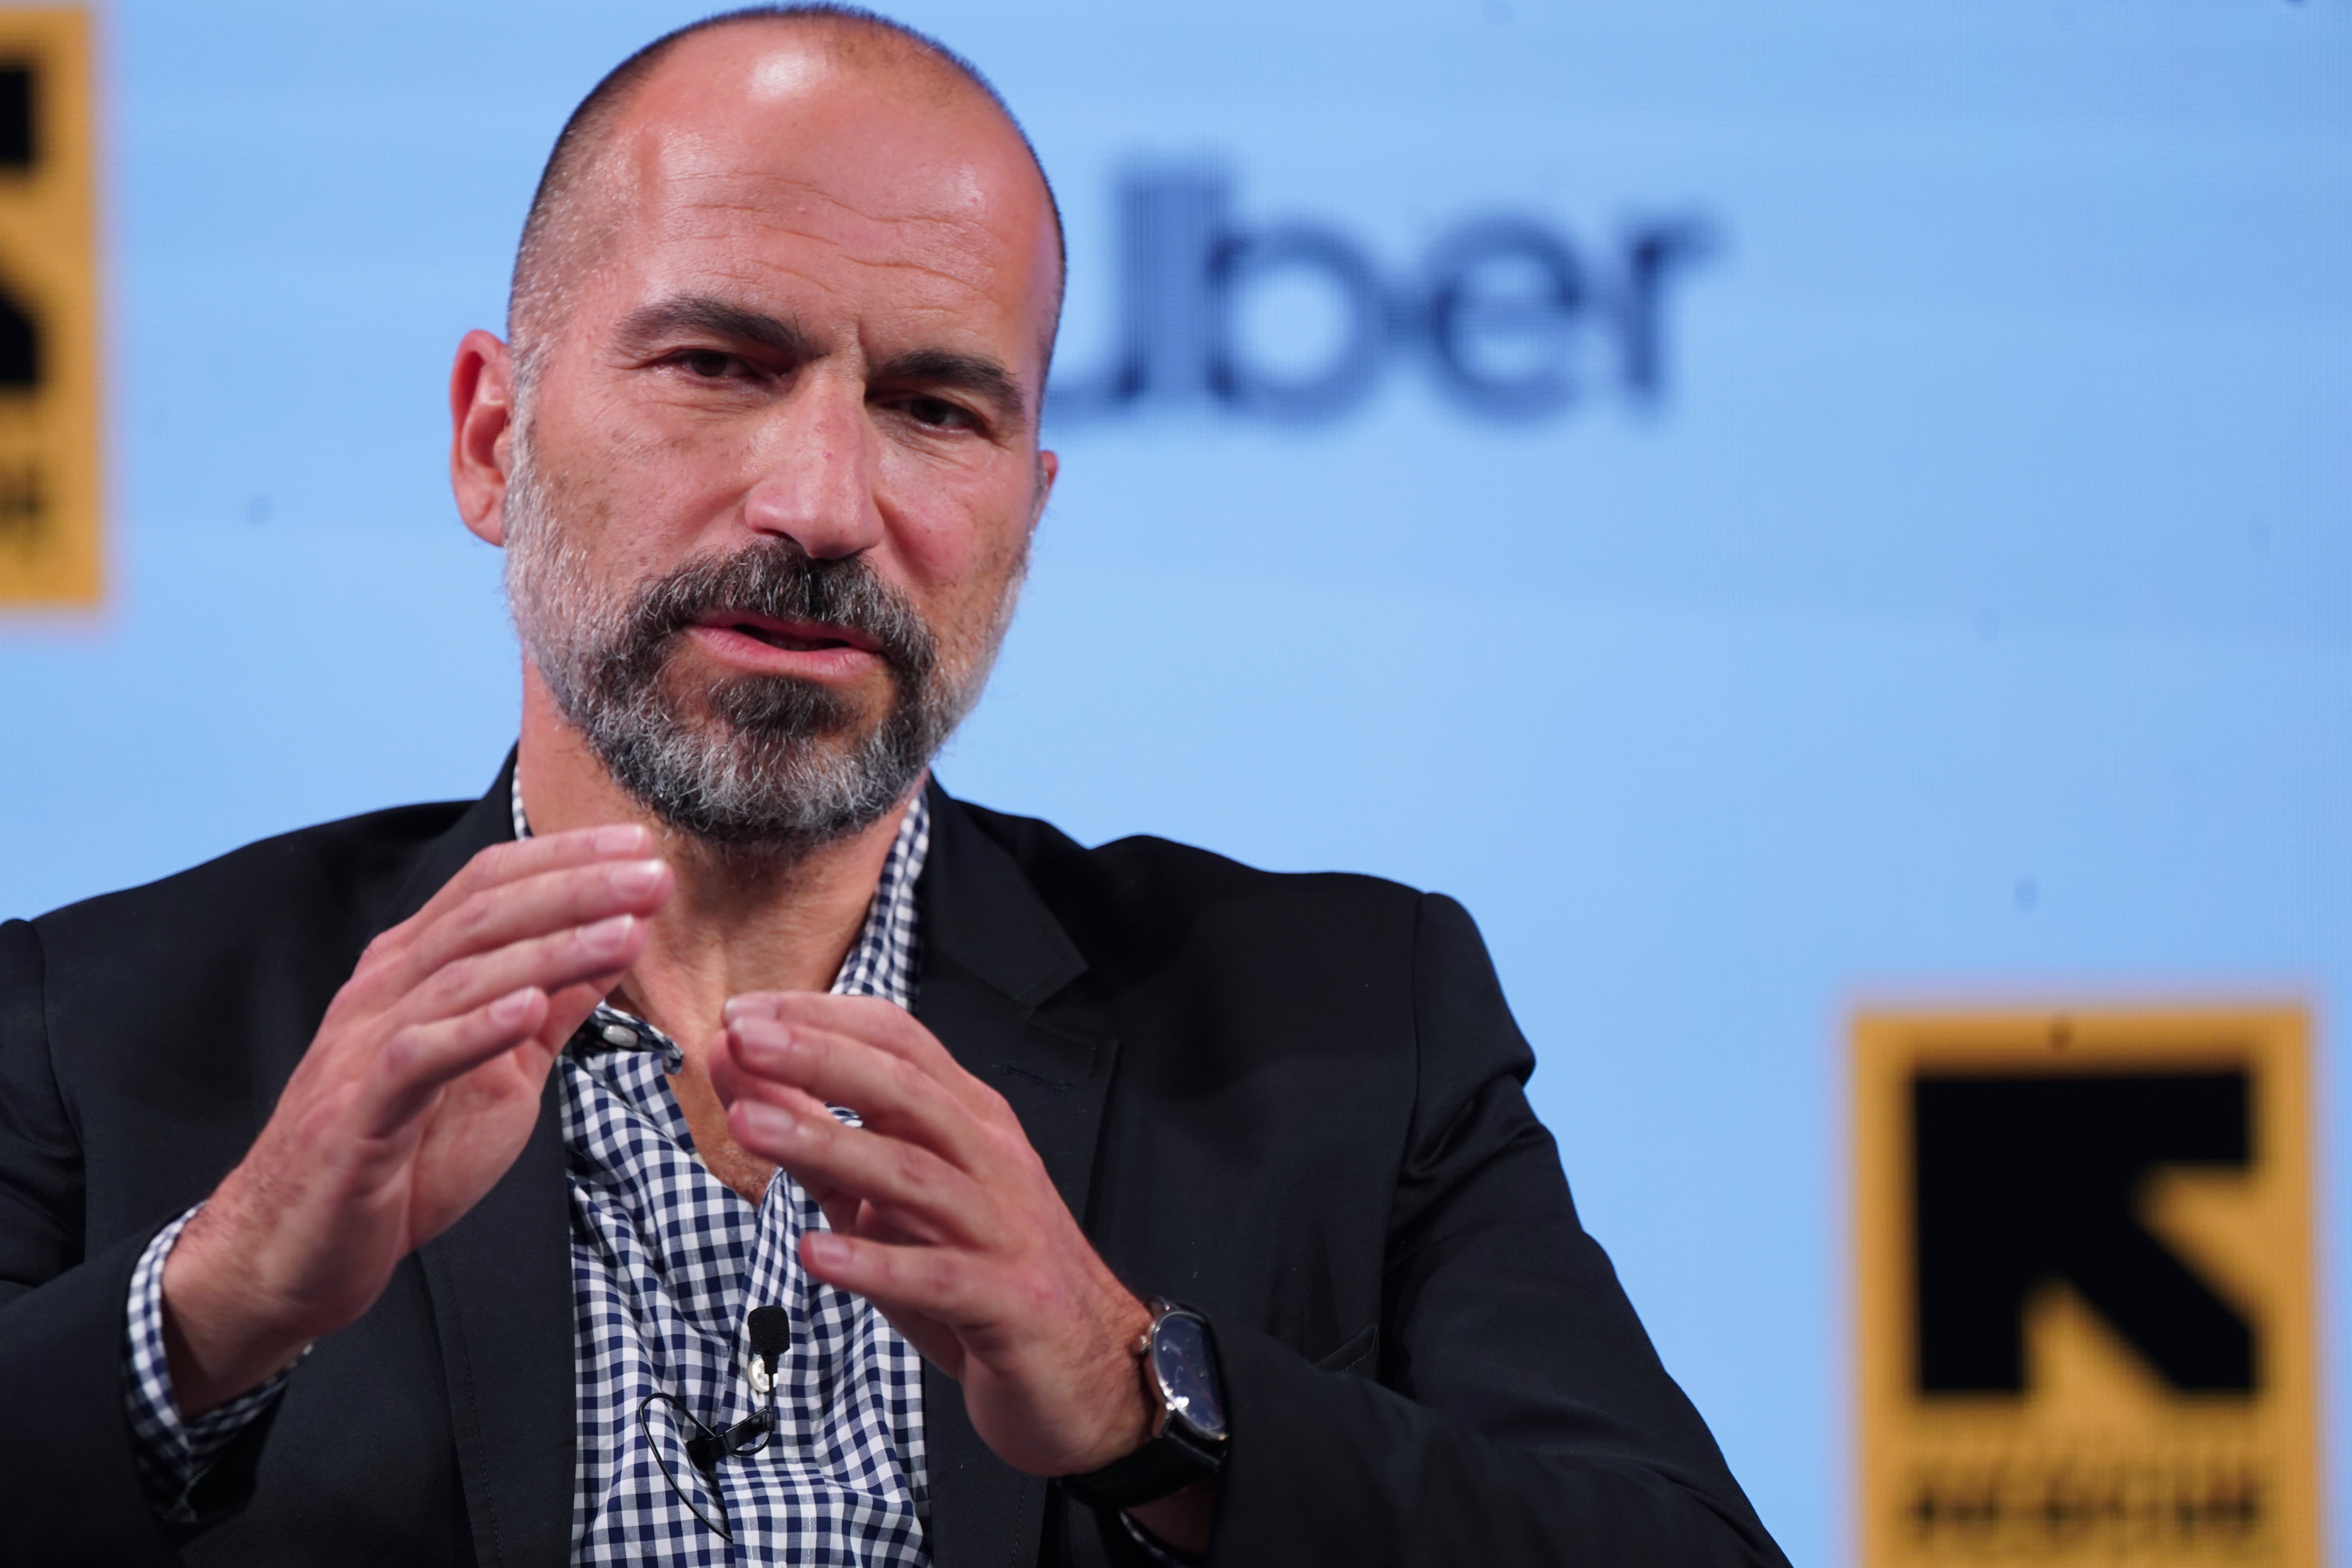 Uber says it's cutting back on spending to become a free cash flow company